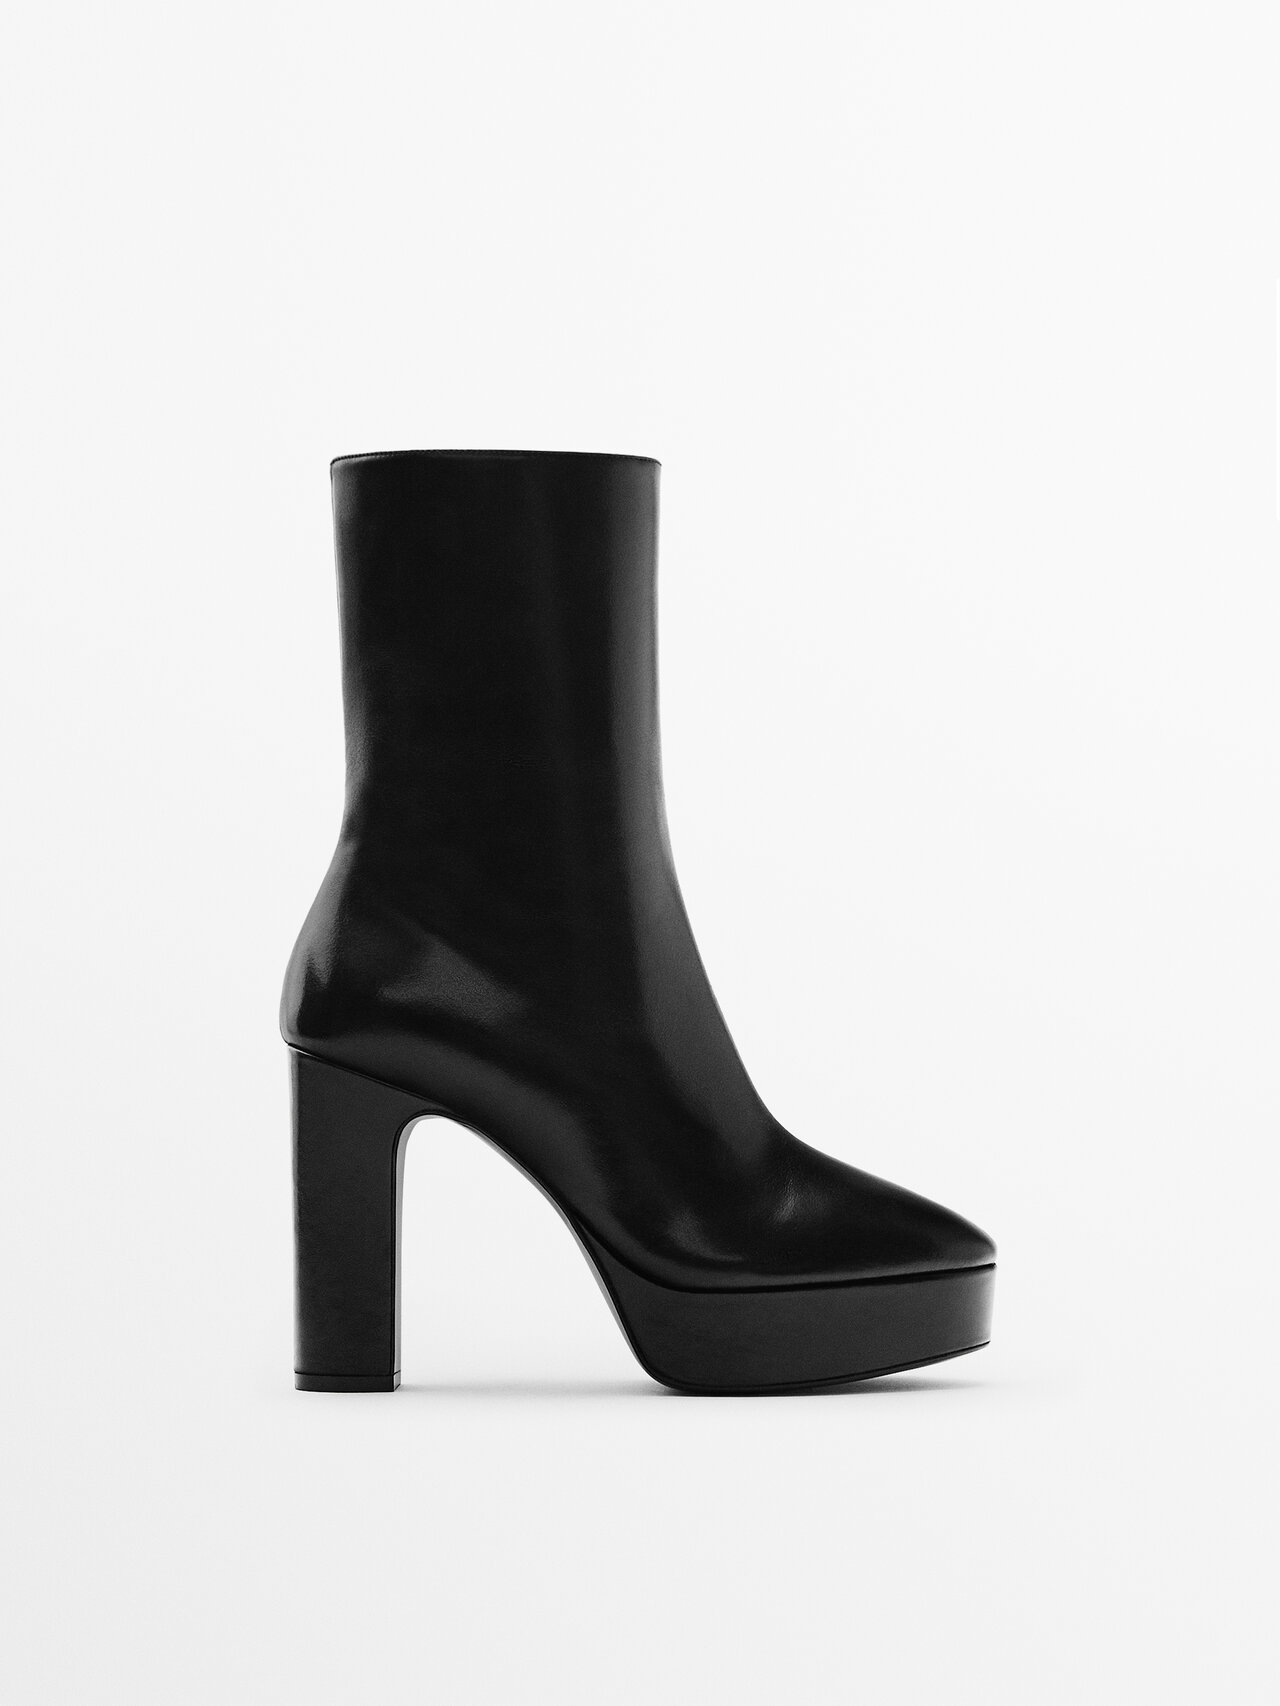 Massimo Dutti Leather Platform Ankle Boots - Studio In Black